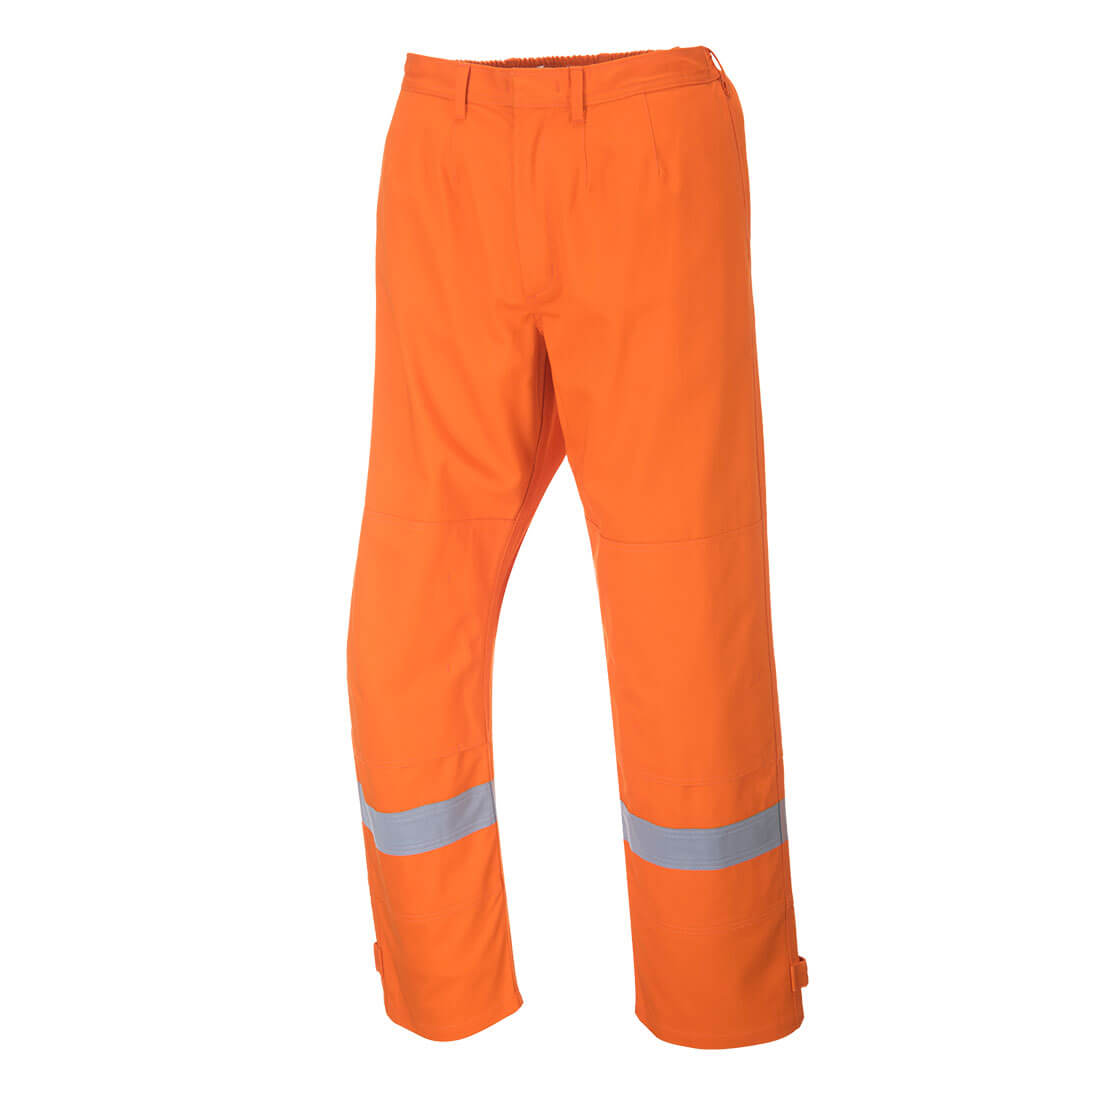 Photo of Biz Flame Plus Mens Flame Resistant Trousers Orange Small 32